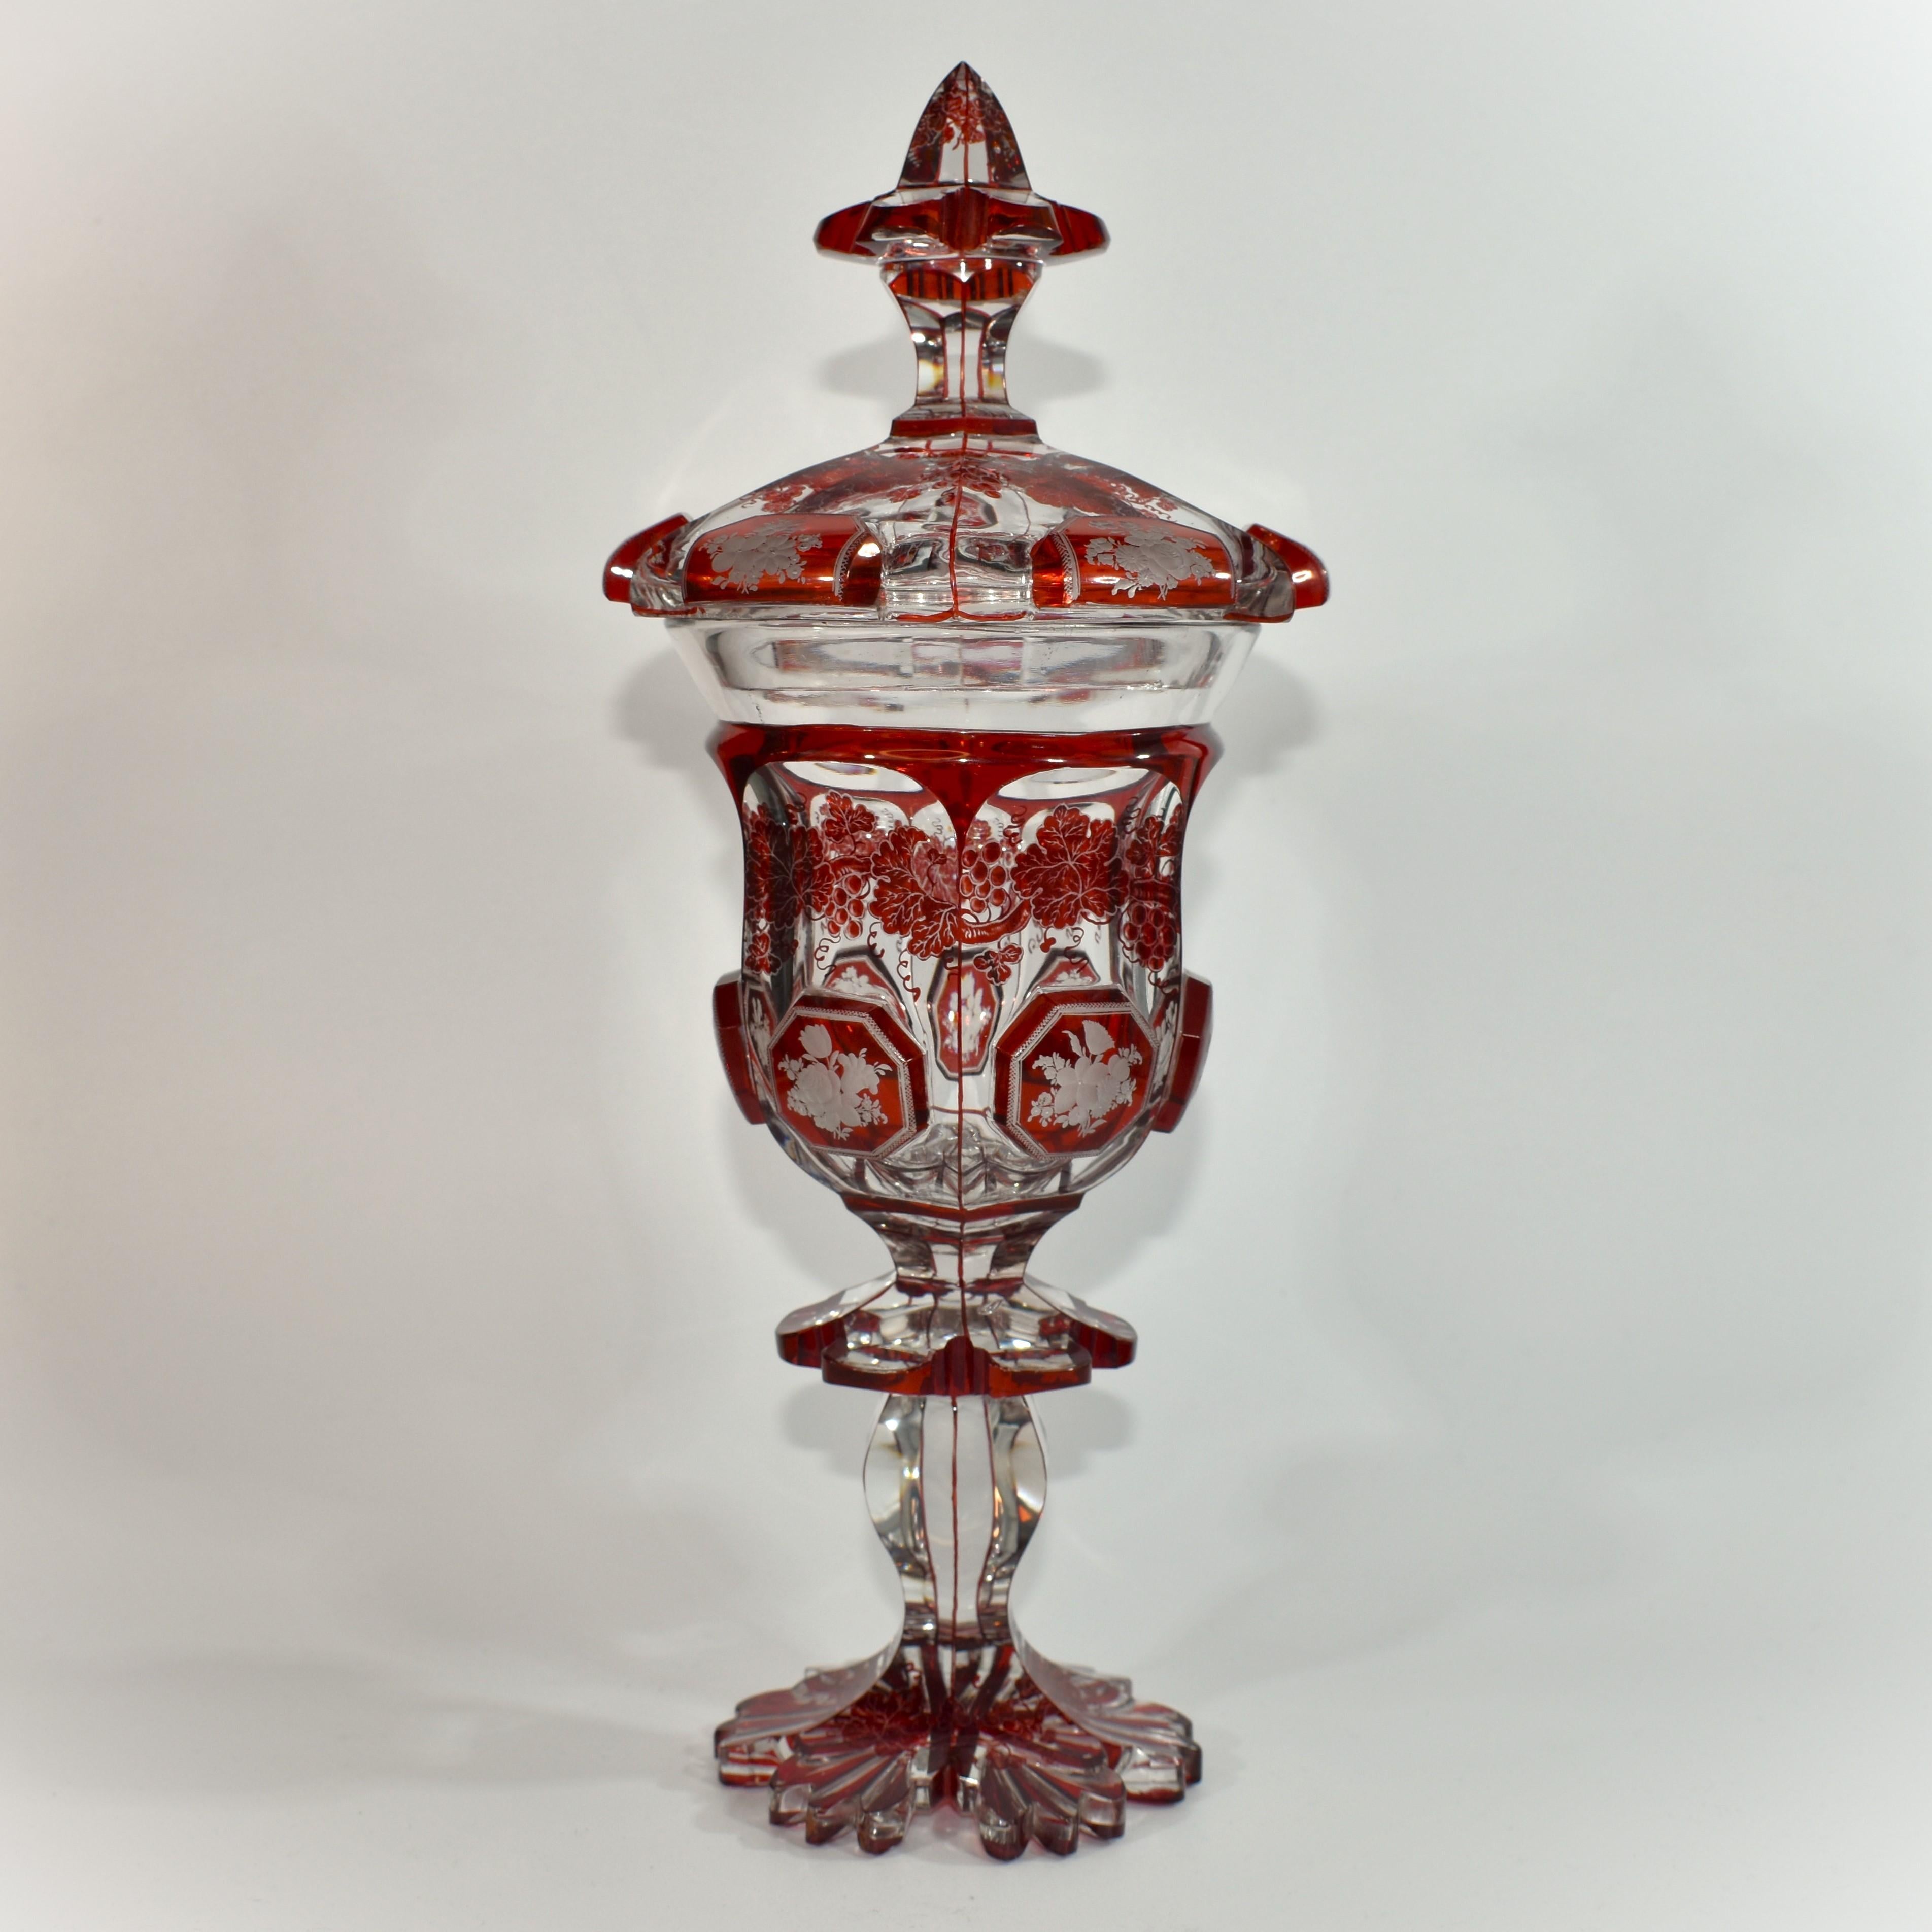 Fine Goblet and Cover of the Highest Quality Bohemian Glass of the 19th Century

Clear and Ruby-Red, with Ruby-Red Decoration and Engraving Hand-work

Decorated with Vines and Bouquets

Stands on a Scalloped Foot with Flared Base at the